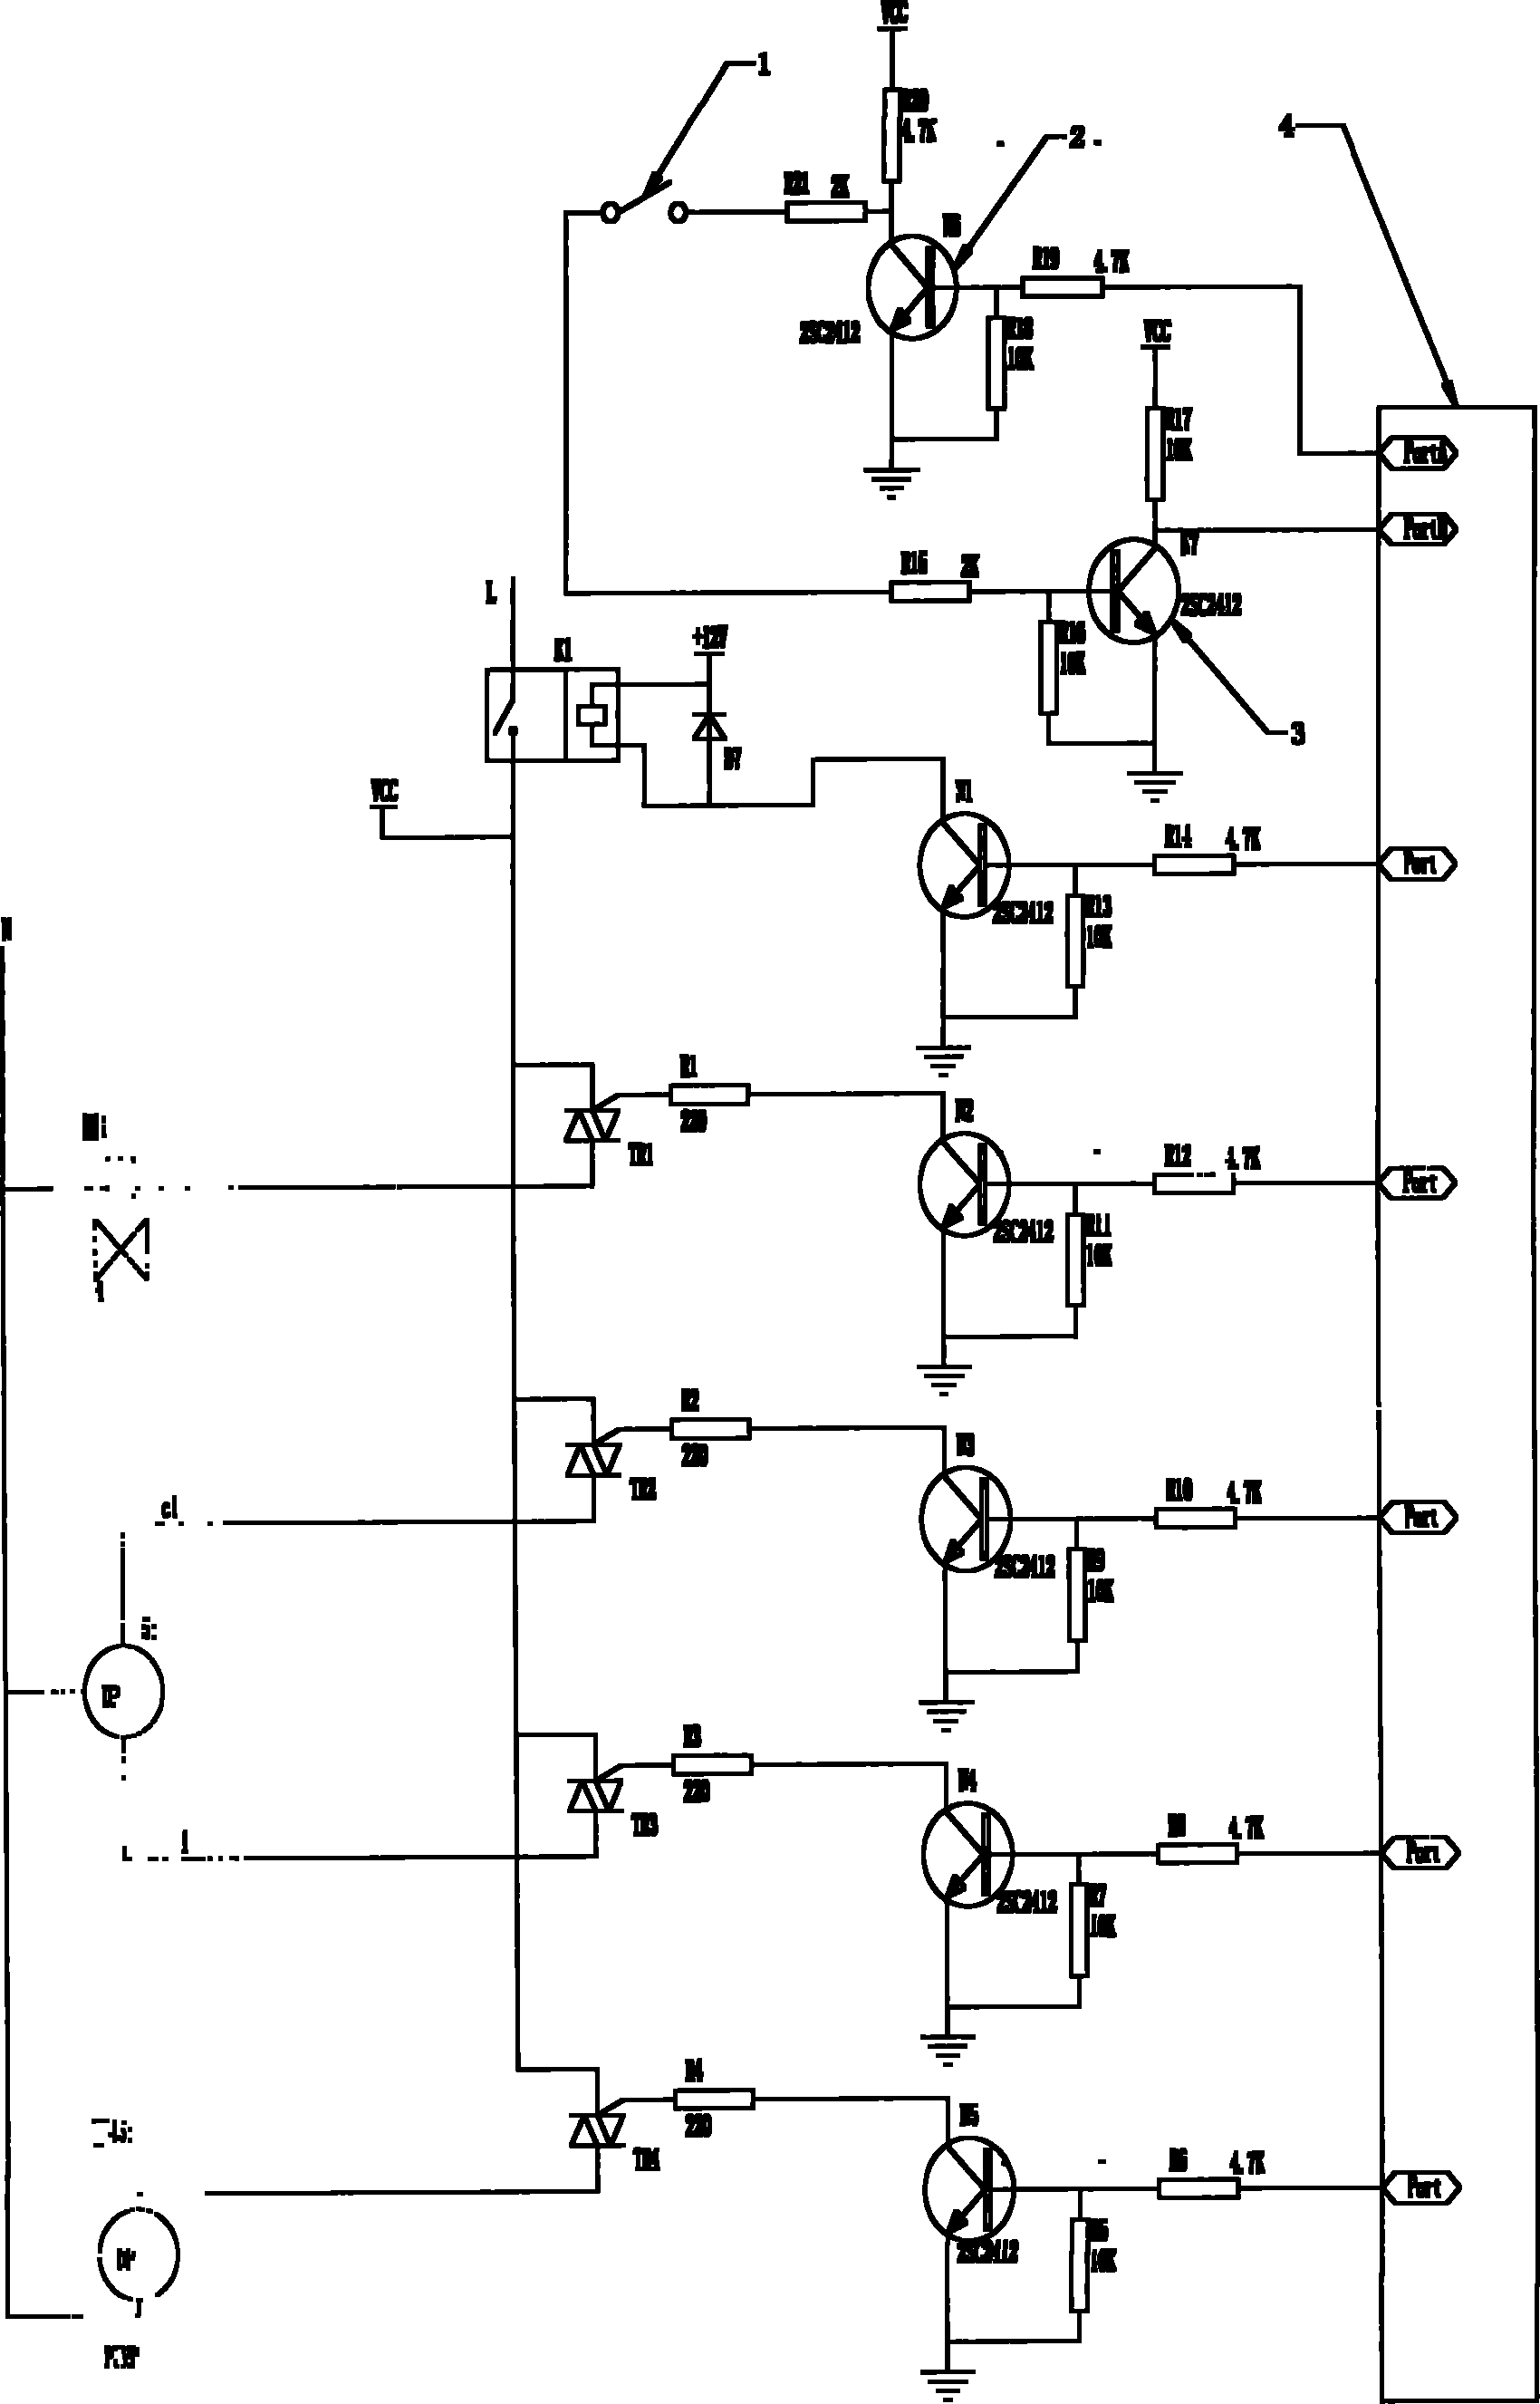 Detection circuit for washing machine door cover